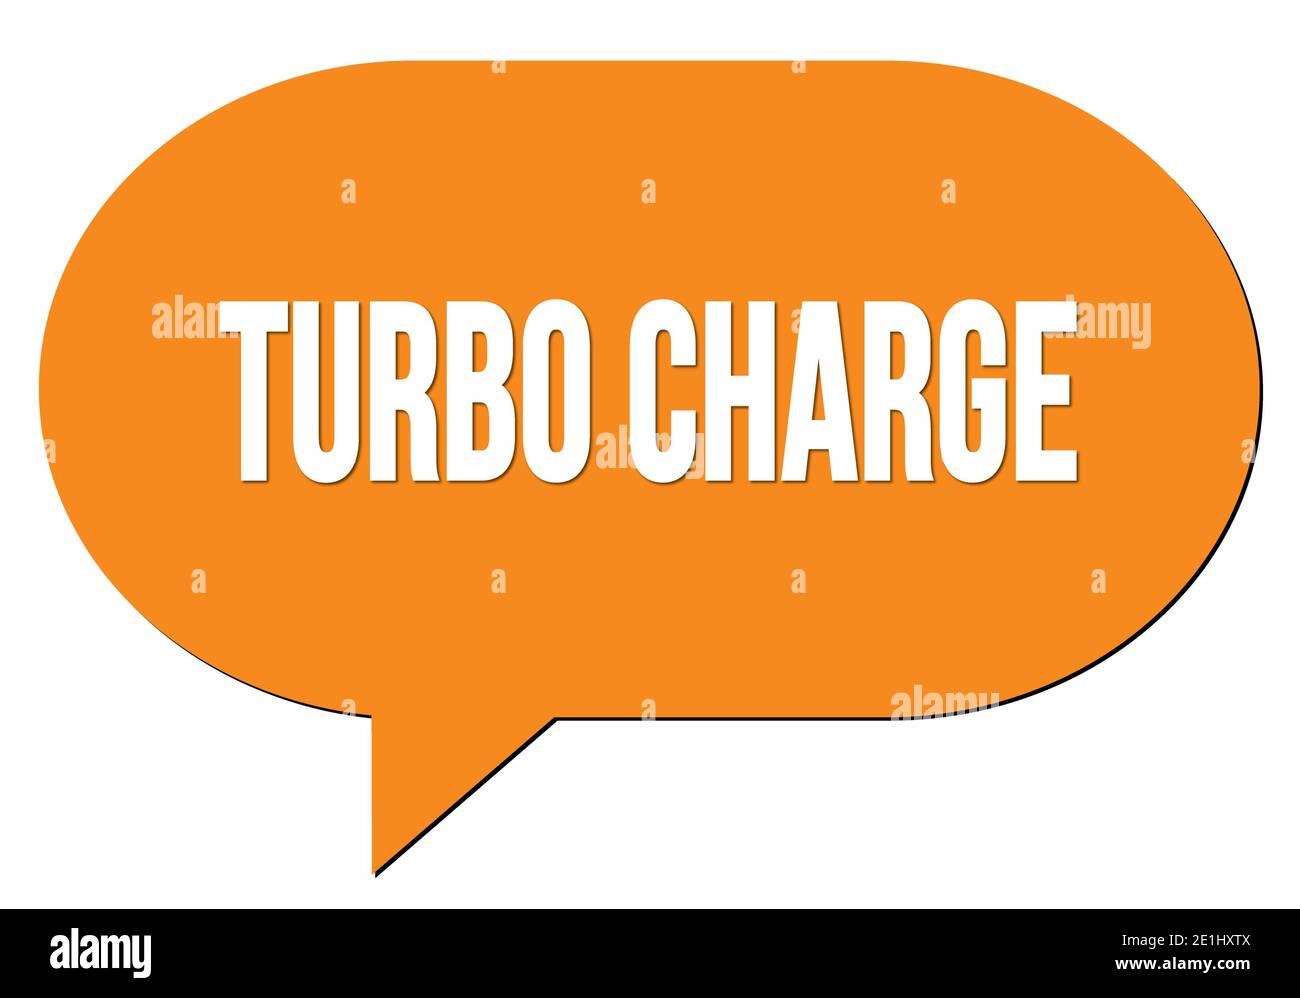 TURBO CHARGE text written in an orange speech bubble stamp Stock Photo